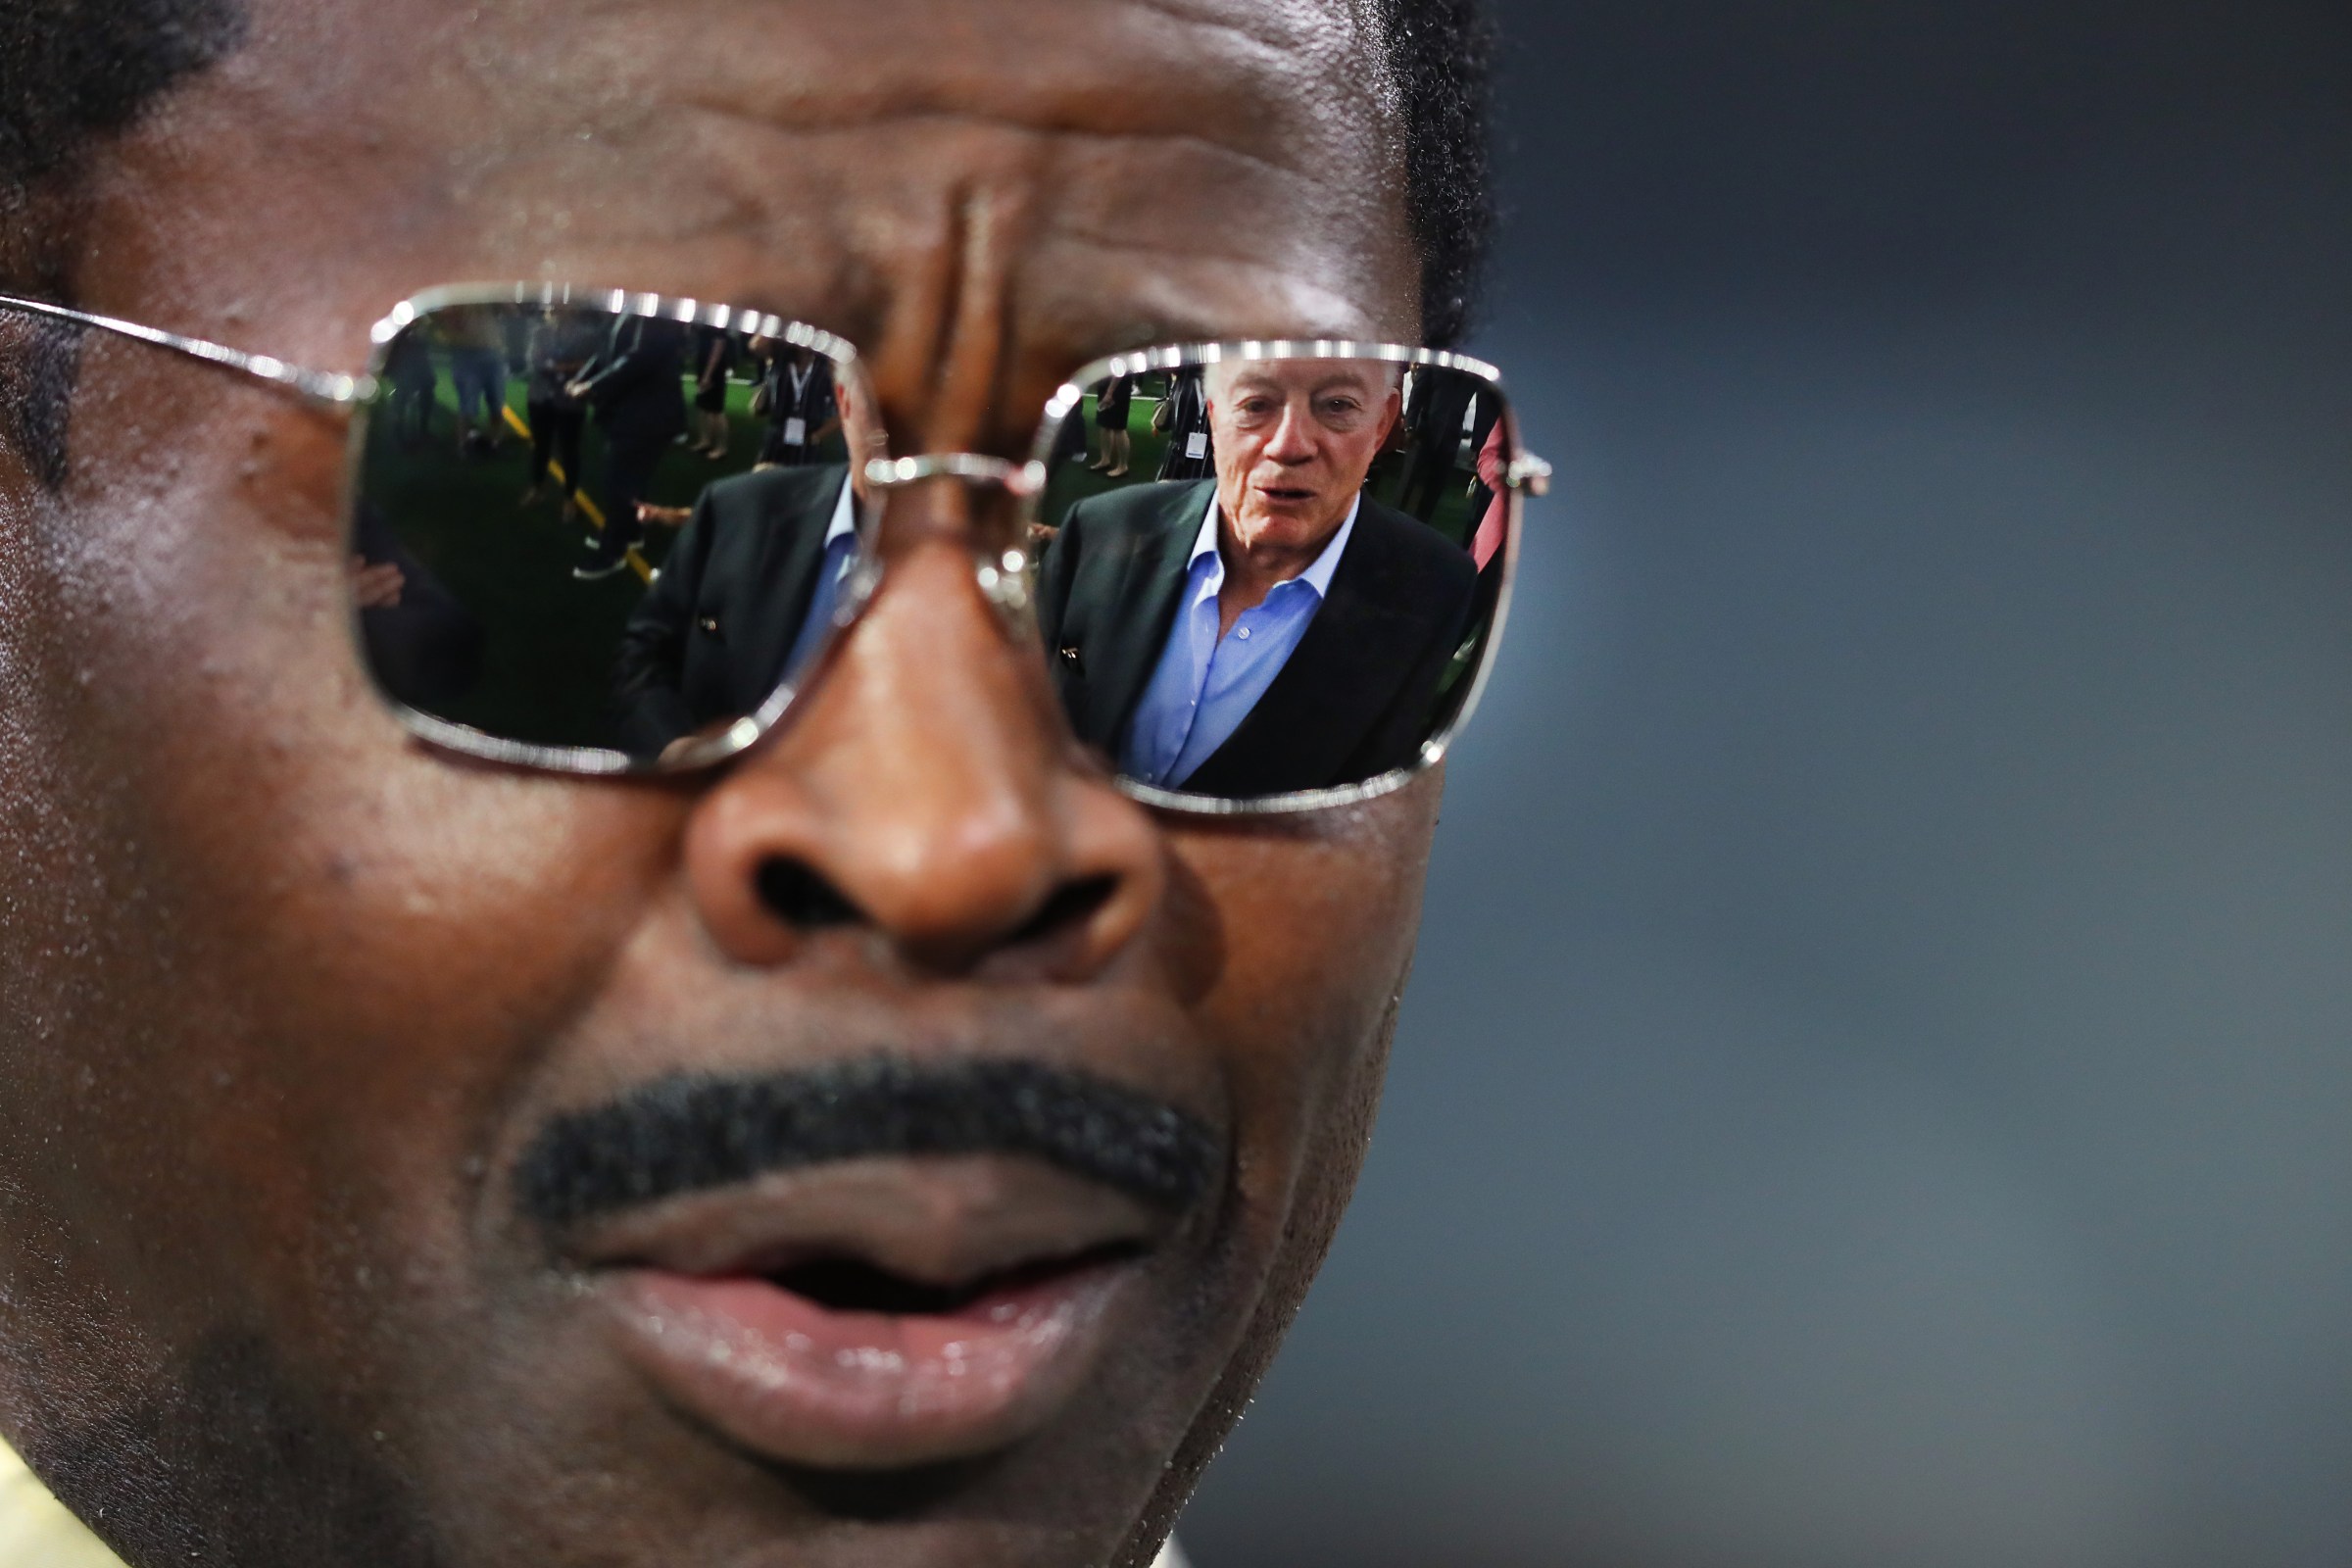 A photograph of Michael Irvin with the hideous image of Jerry Jones reflected in his sunglass lenses.